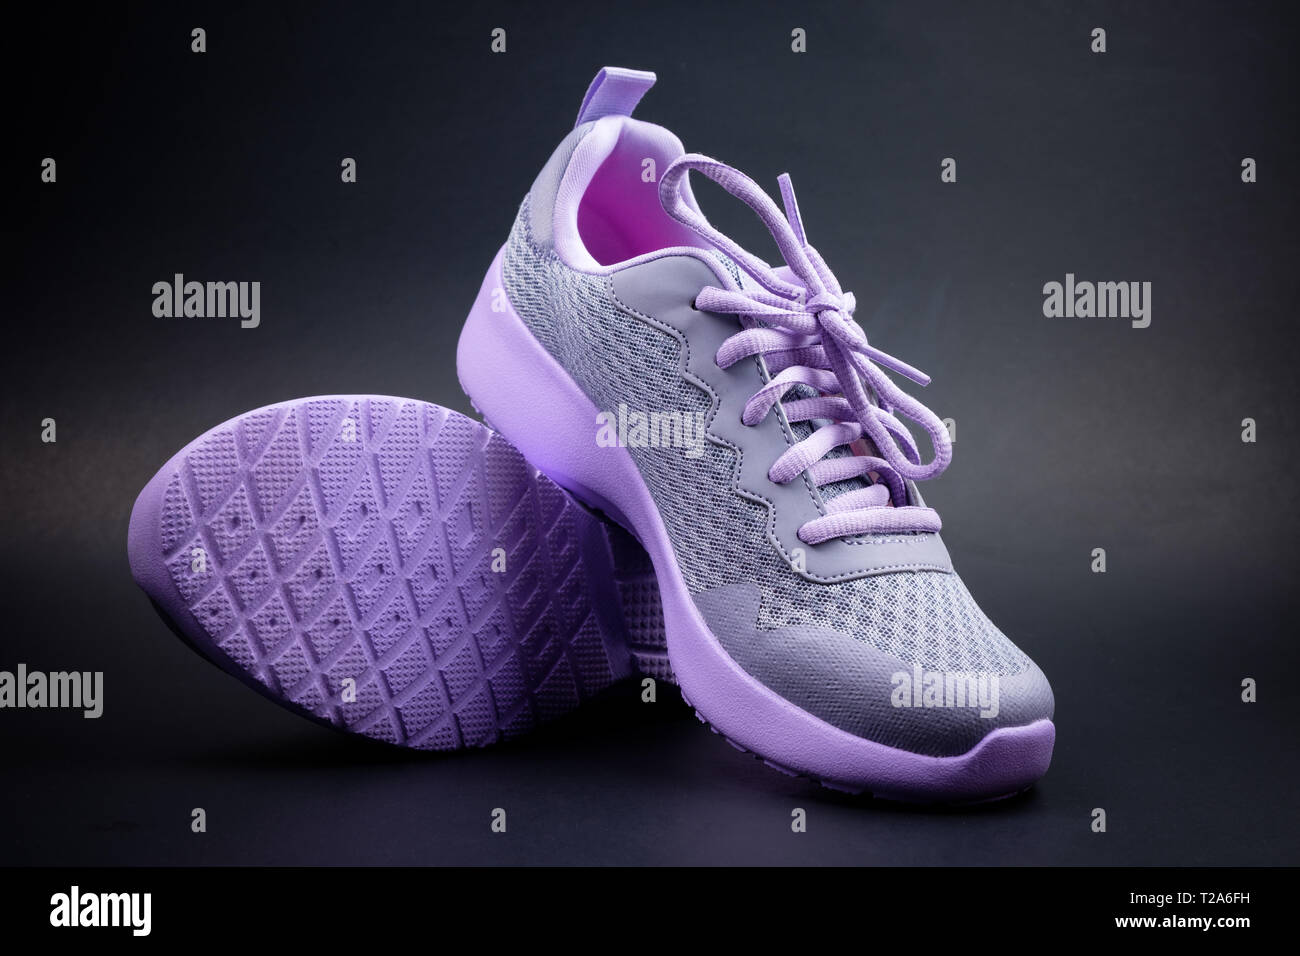 Unbranded purple running shoes on a black background Stock Photo